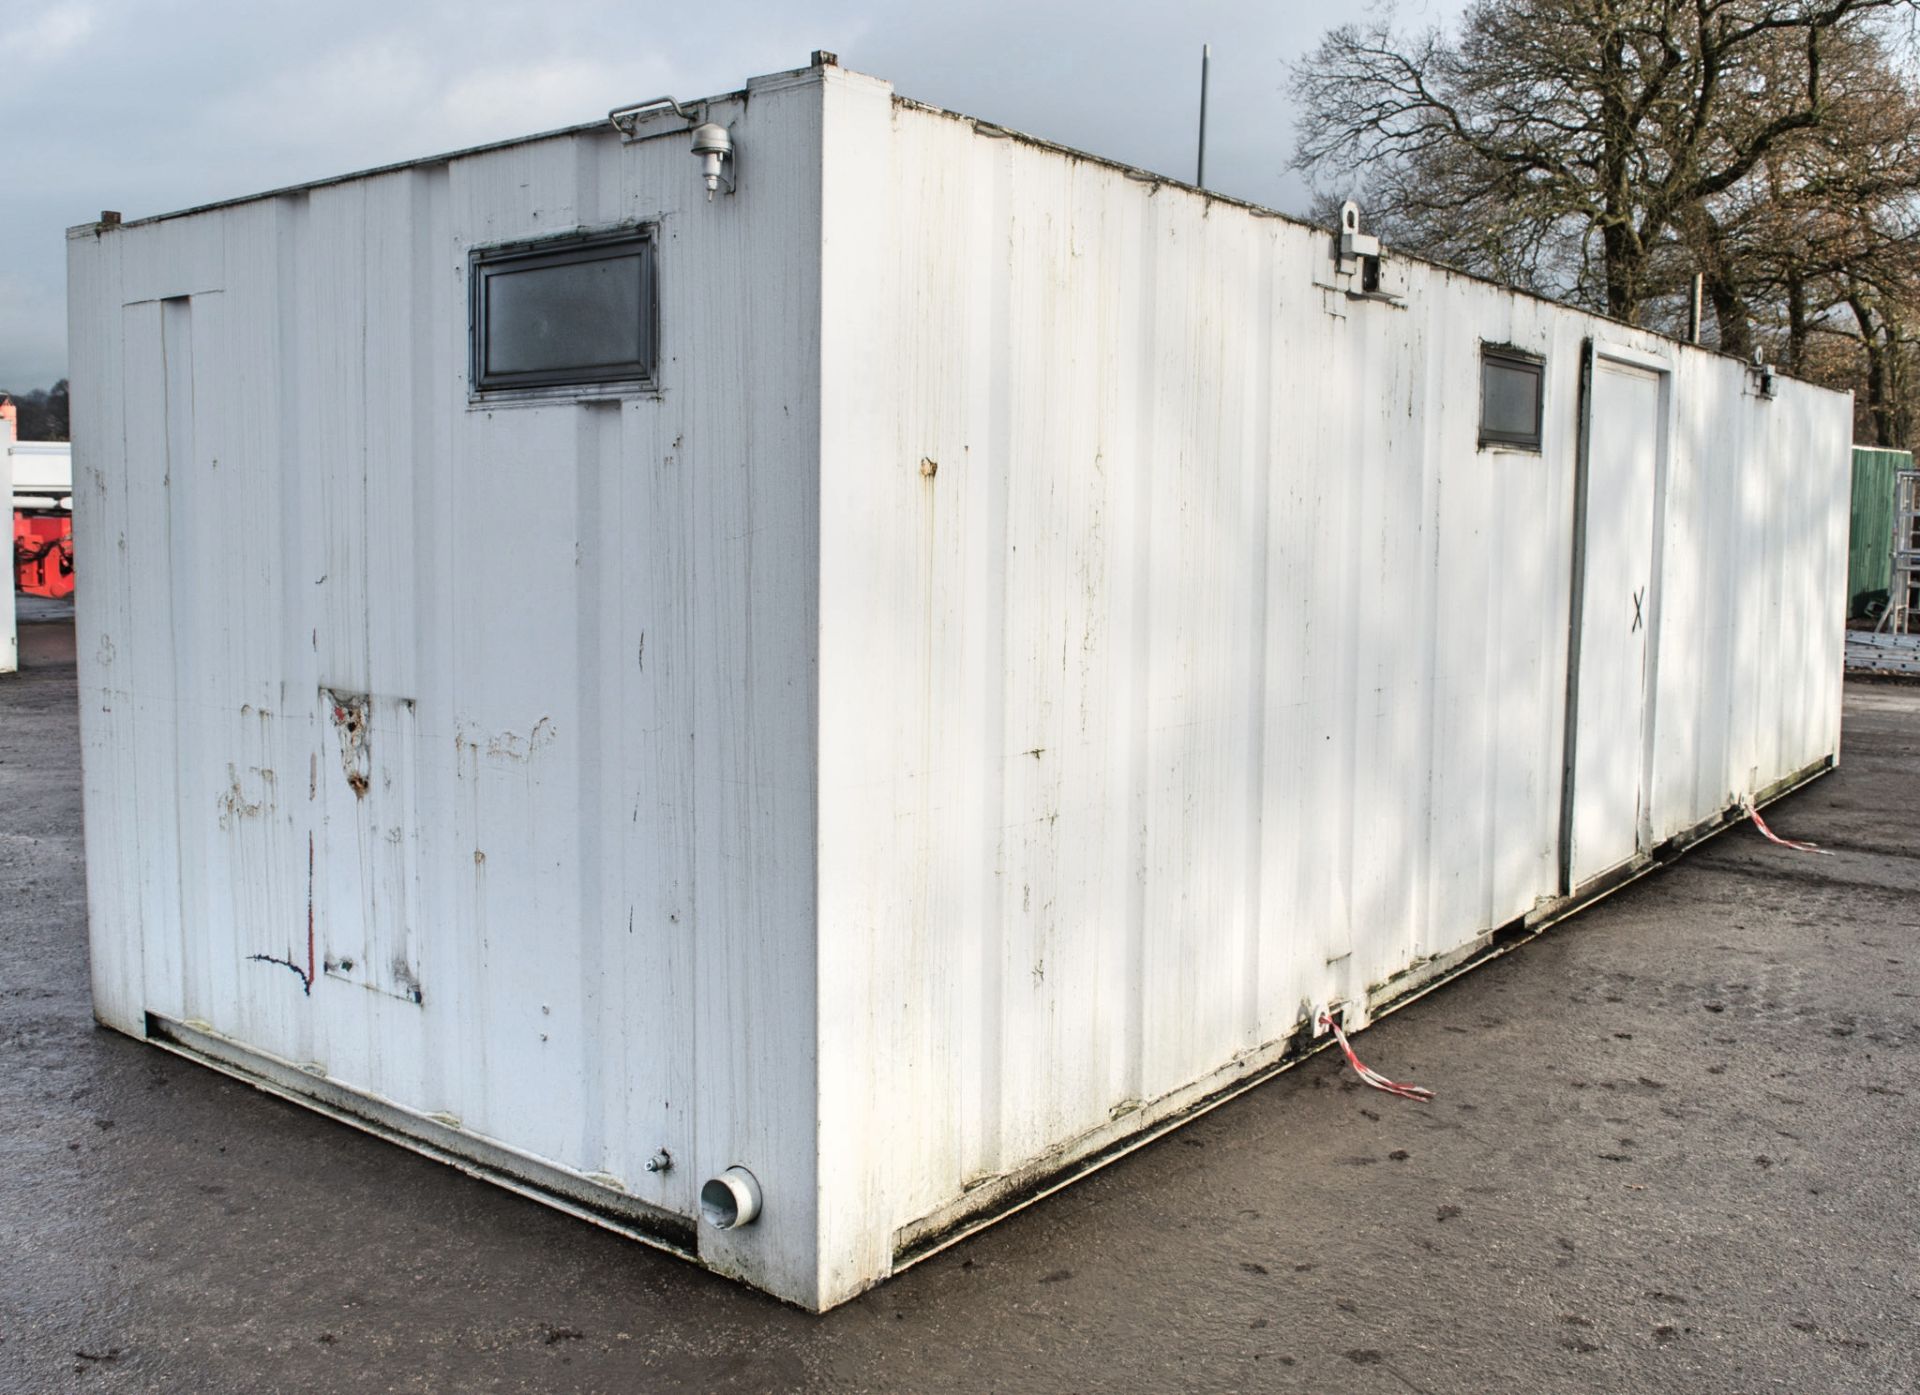 32 ft x 10 ft steel anti-vandal toilet/changing room site unit Comprising of: Lobby, Kitchen